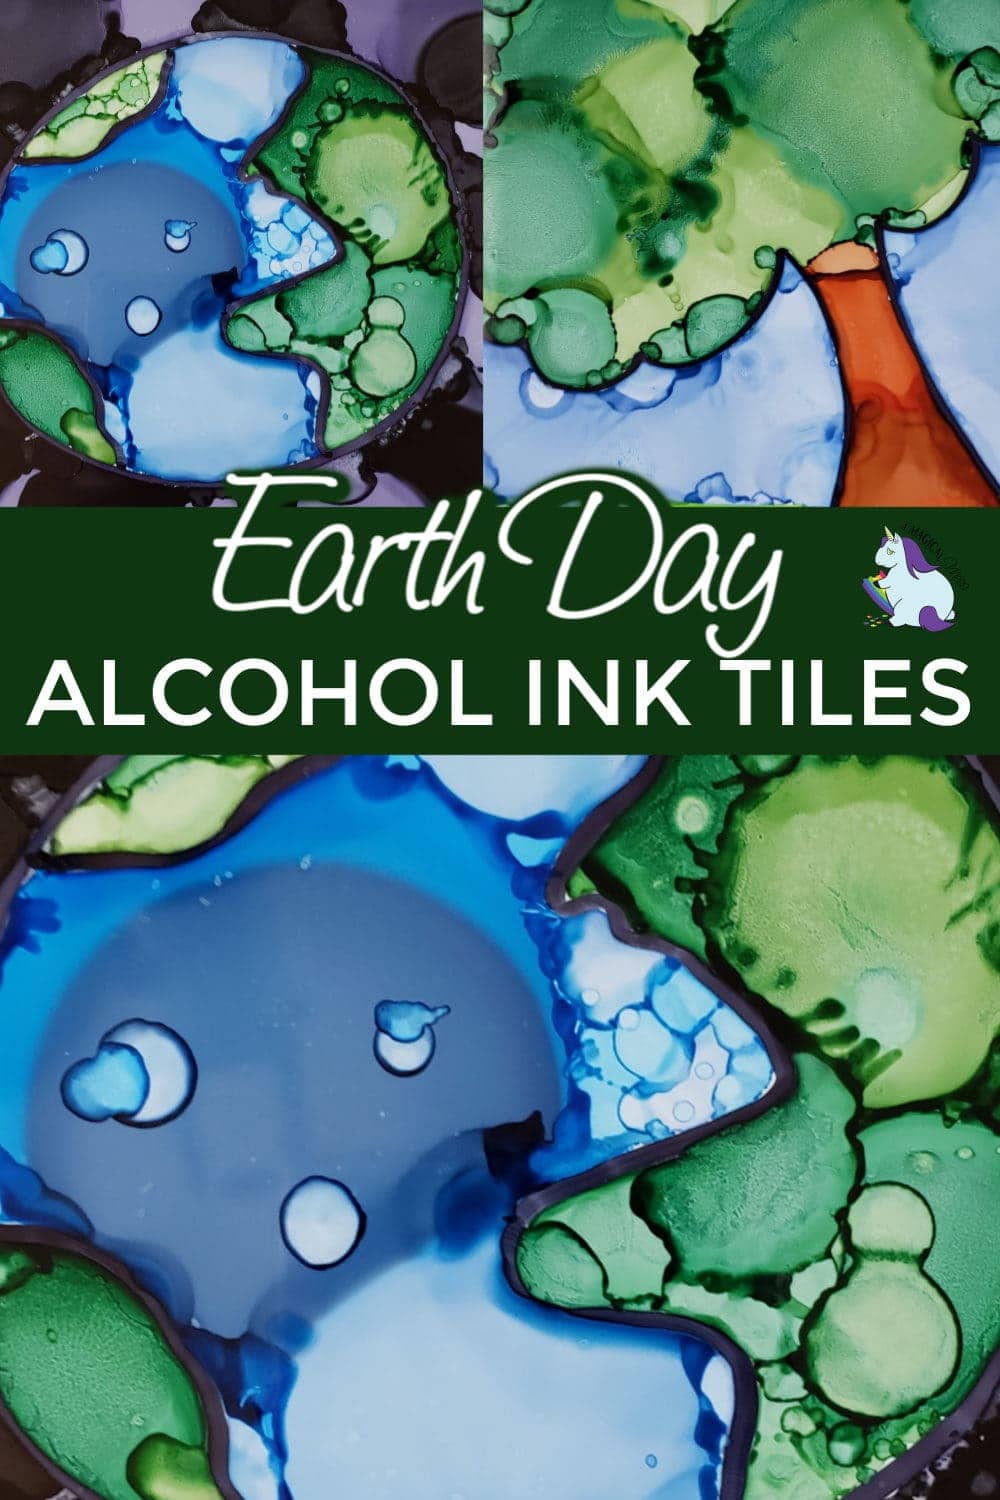 Earth Day craft ideas - Alcohol ink on tiles